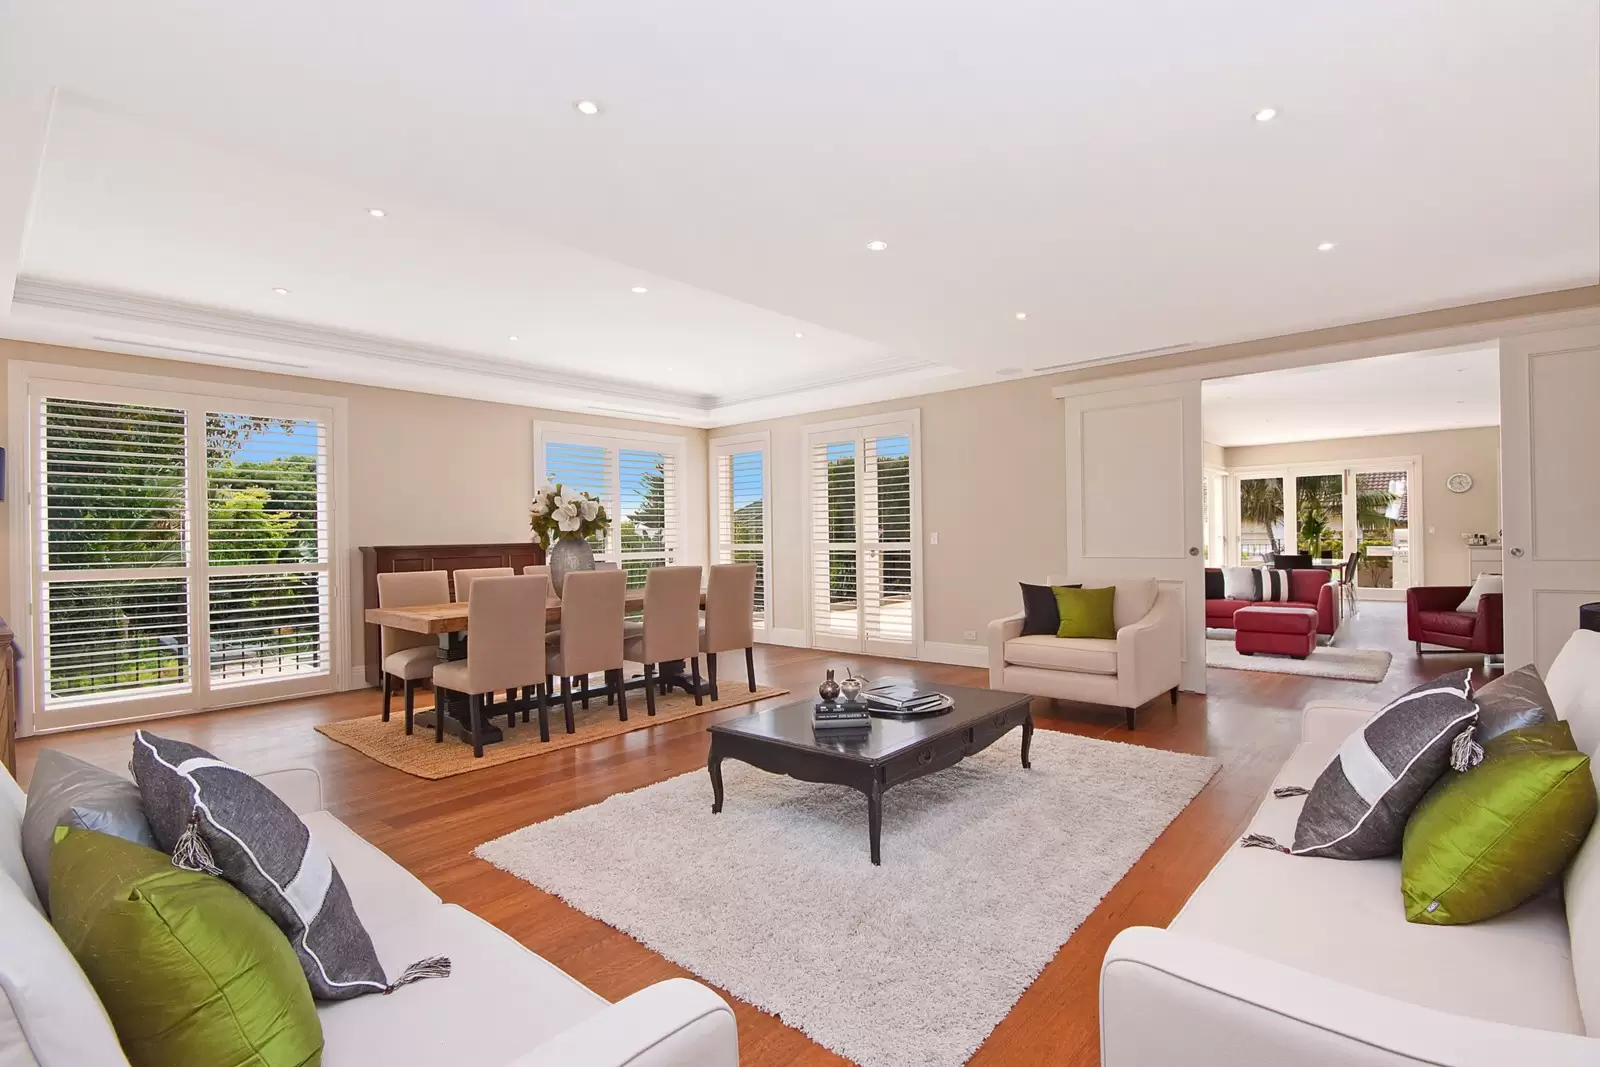 Photo #5: 22 March Street, Bellevue Hill - Sold by Sydney Sotheby's International Realty